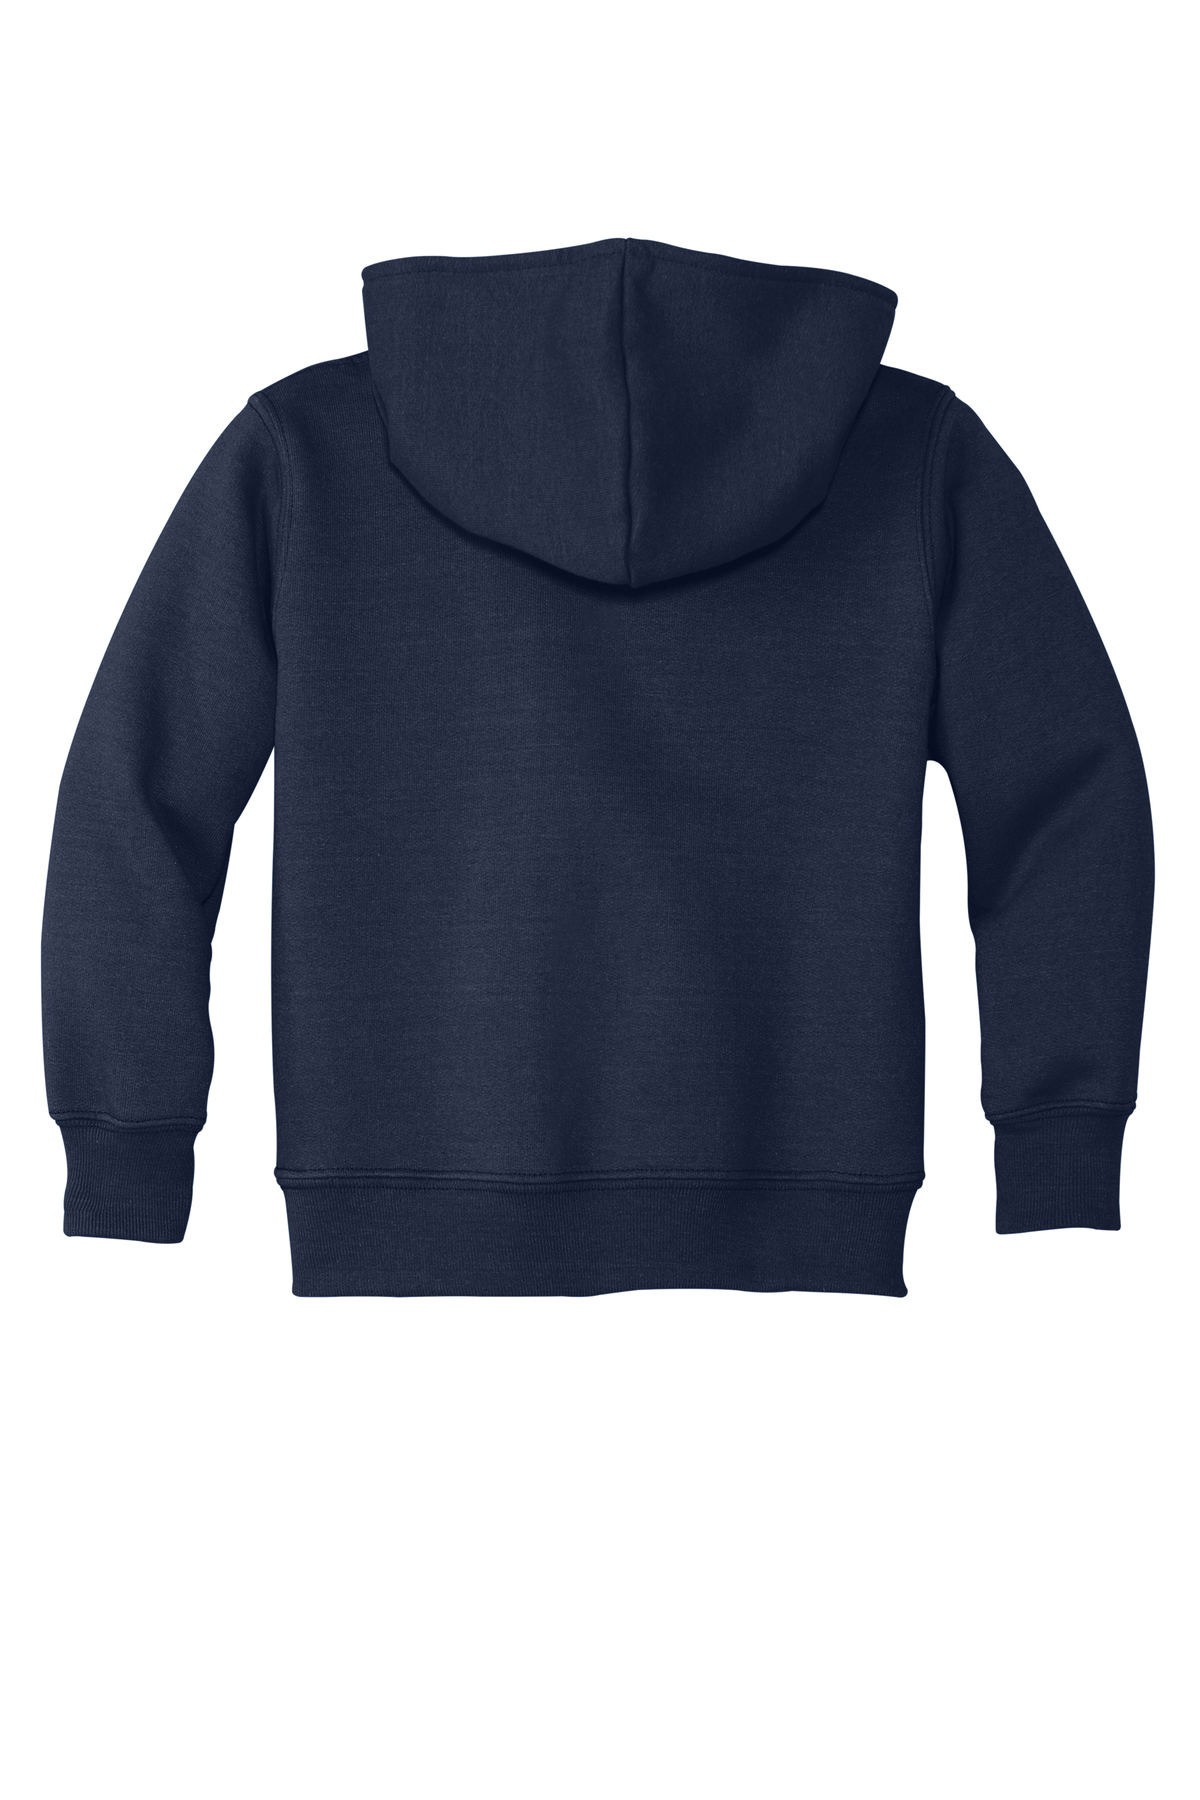 Port & Company Toddler Core Fleece Pullover Hooded Sweatshirt | Product |  Port & Company